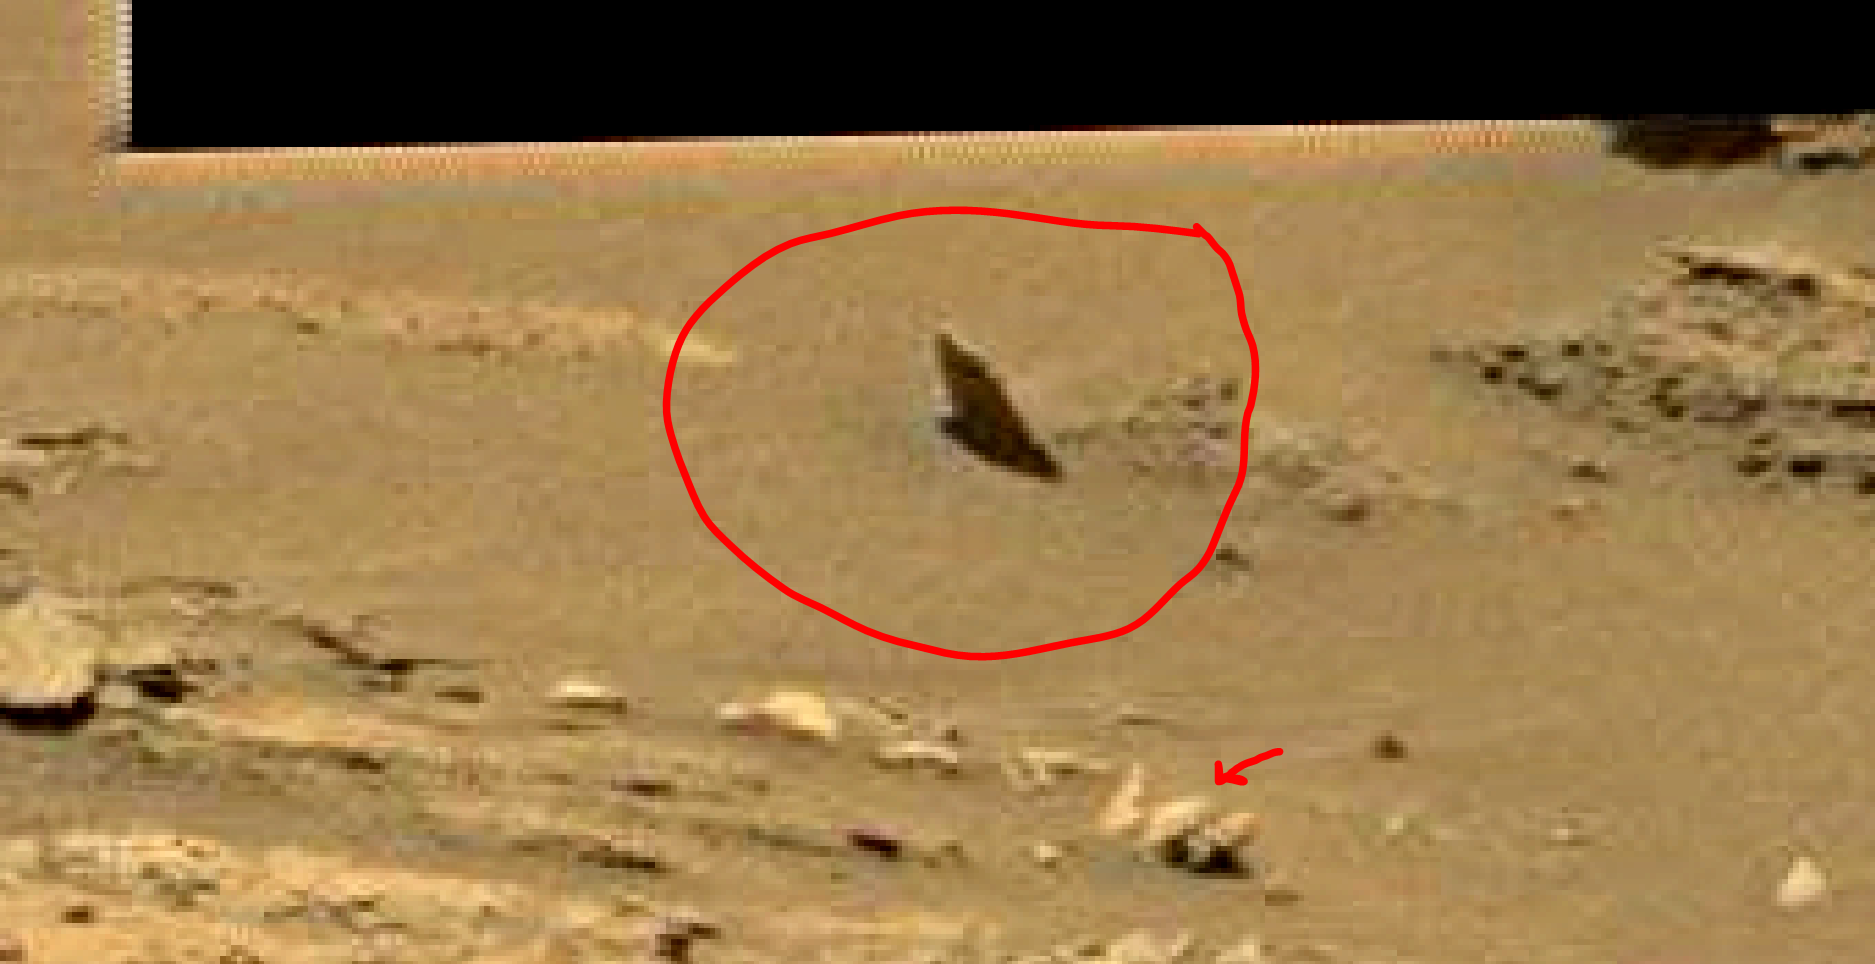 mars sol 1353 anomaly-artifacts 9b was life on mars